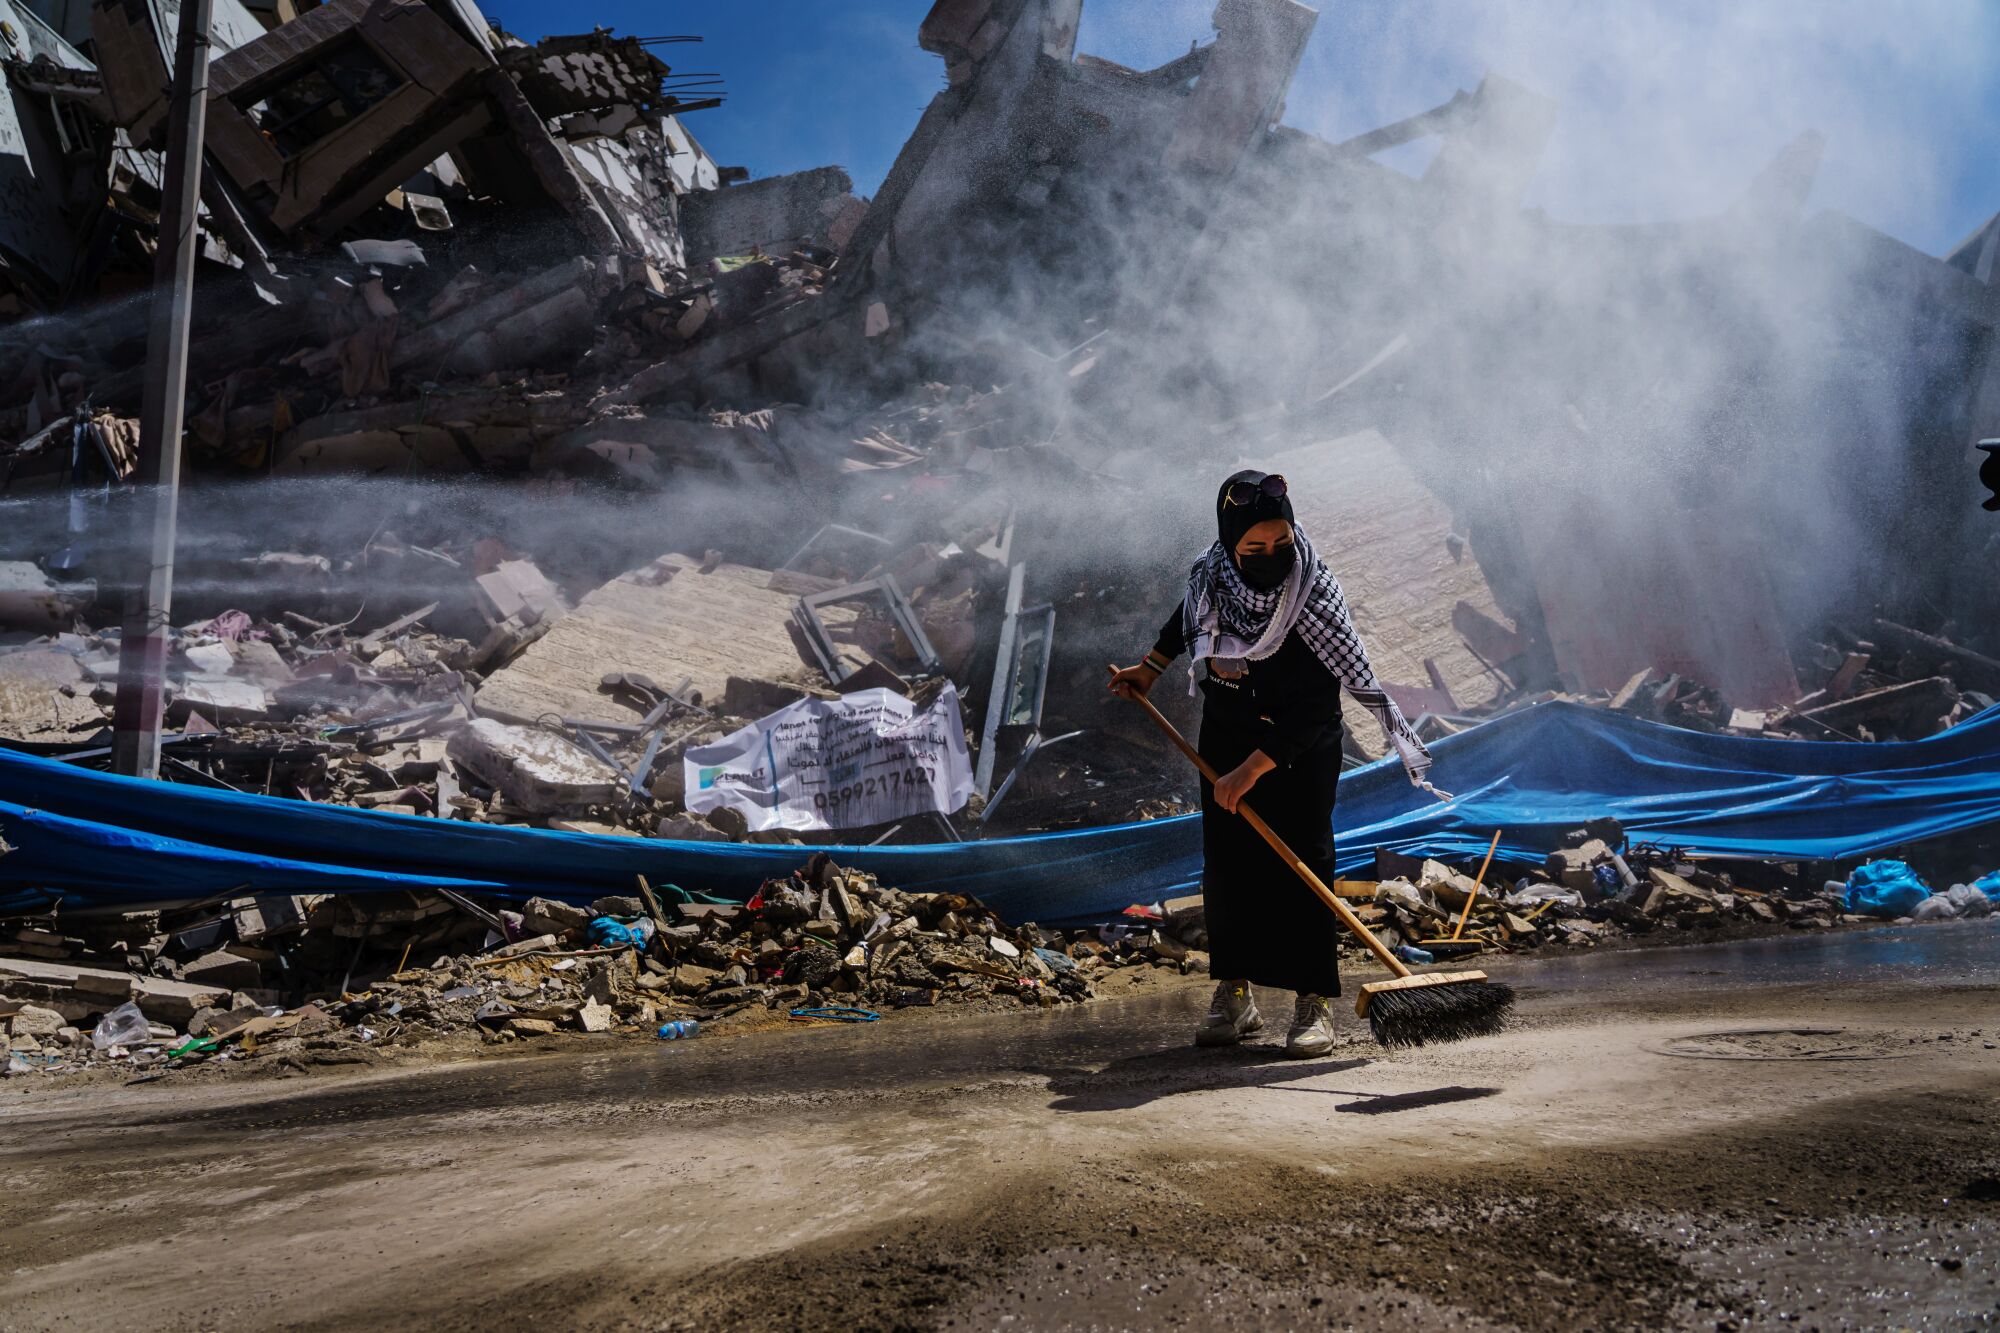  A Palestinian woman uses a broom next to a fallen building 